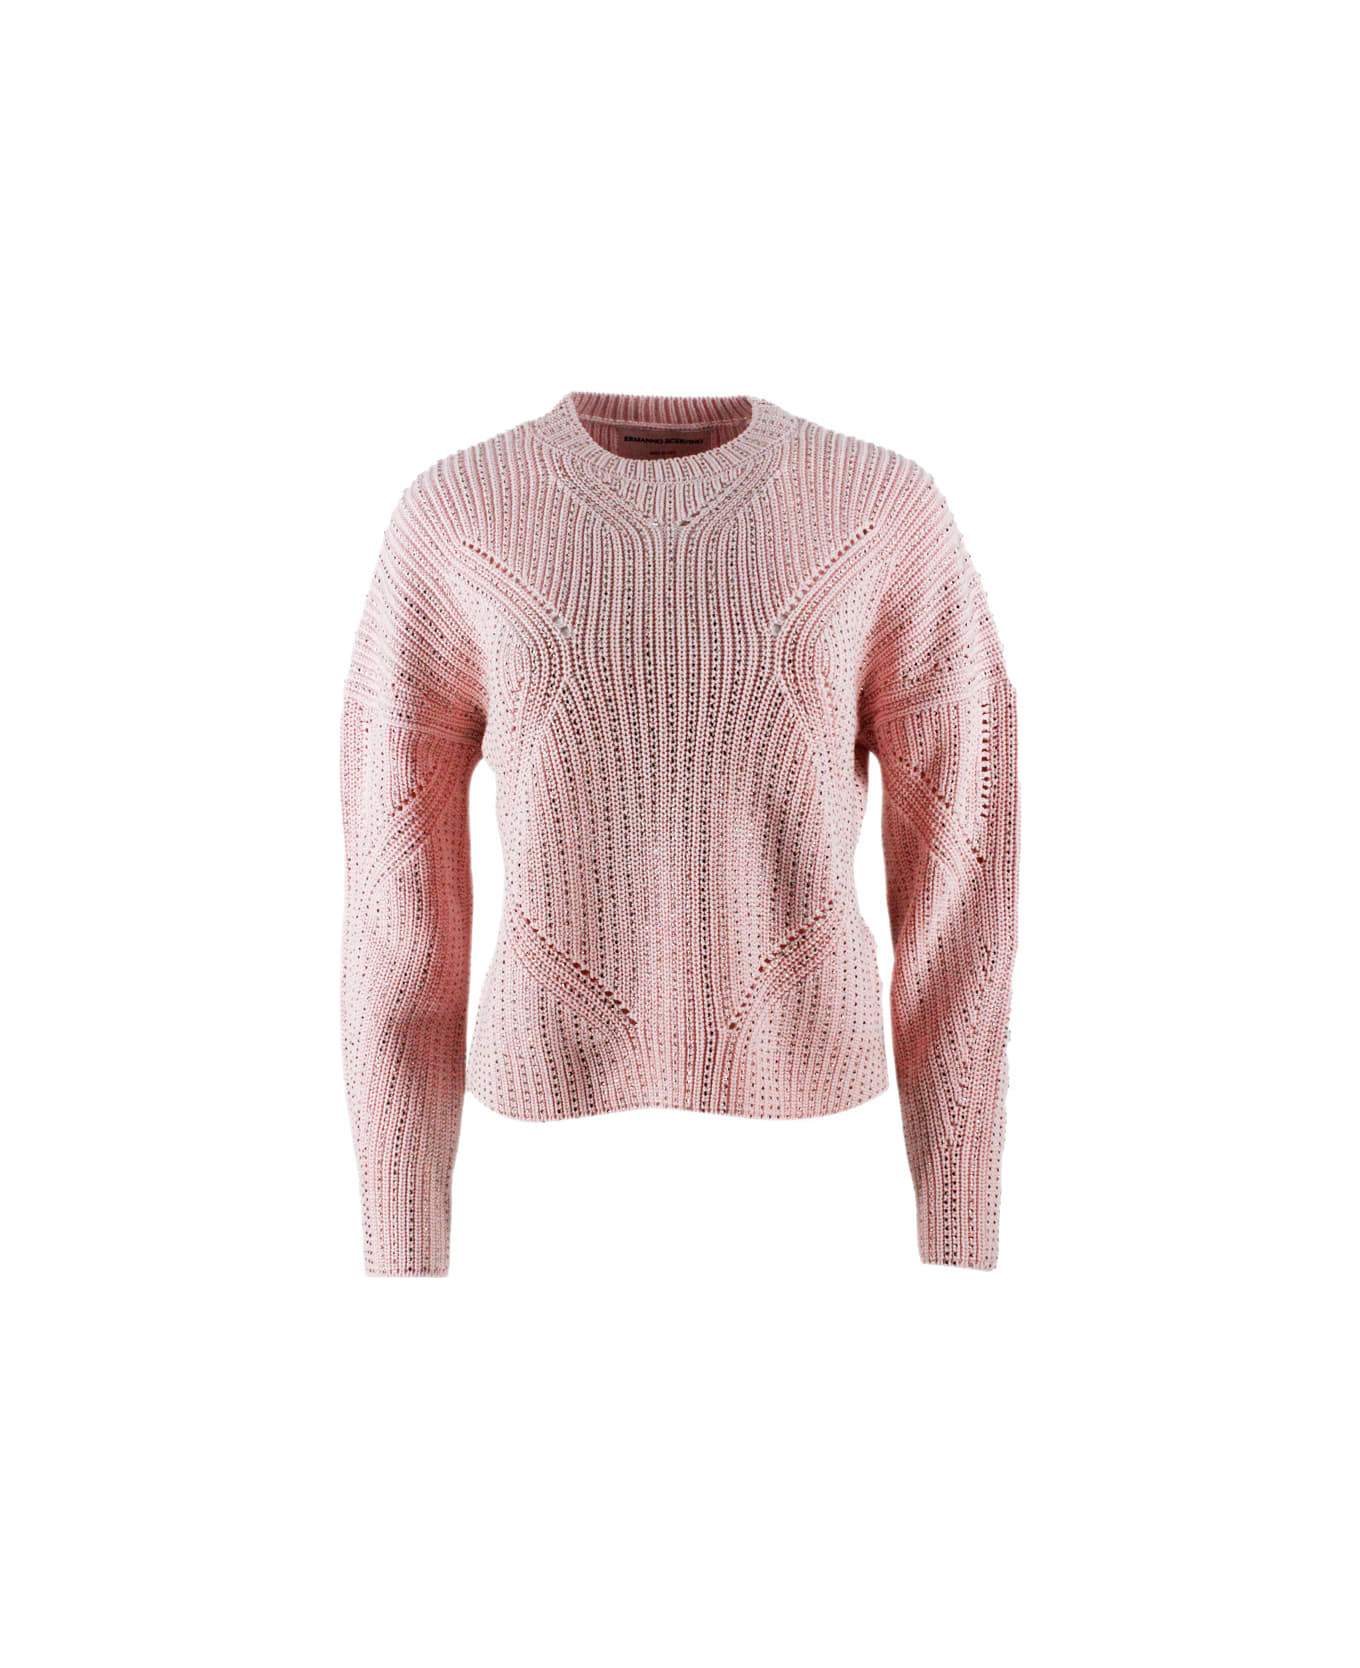 Ermanno Scervino Long-sleeved Crew Neck Sweater In Cotton With Crystals - Pink ニットウェア